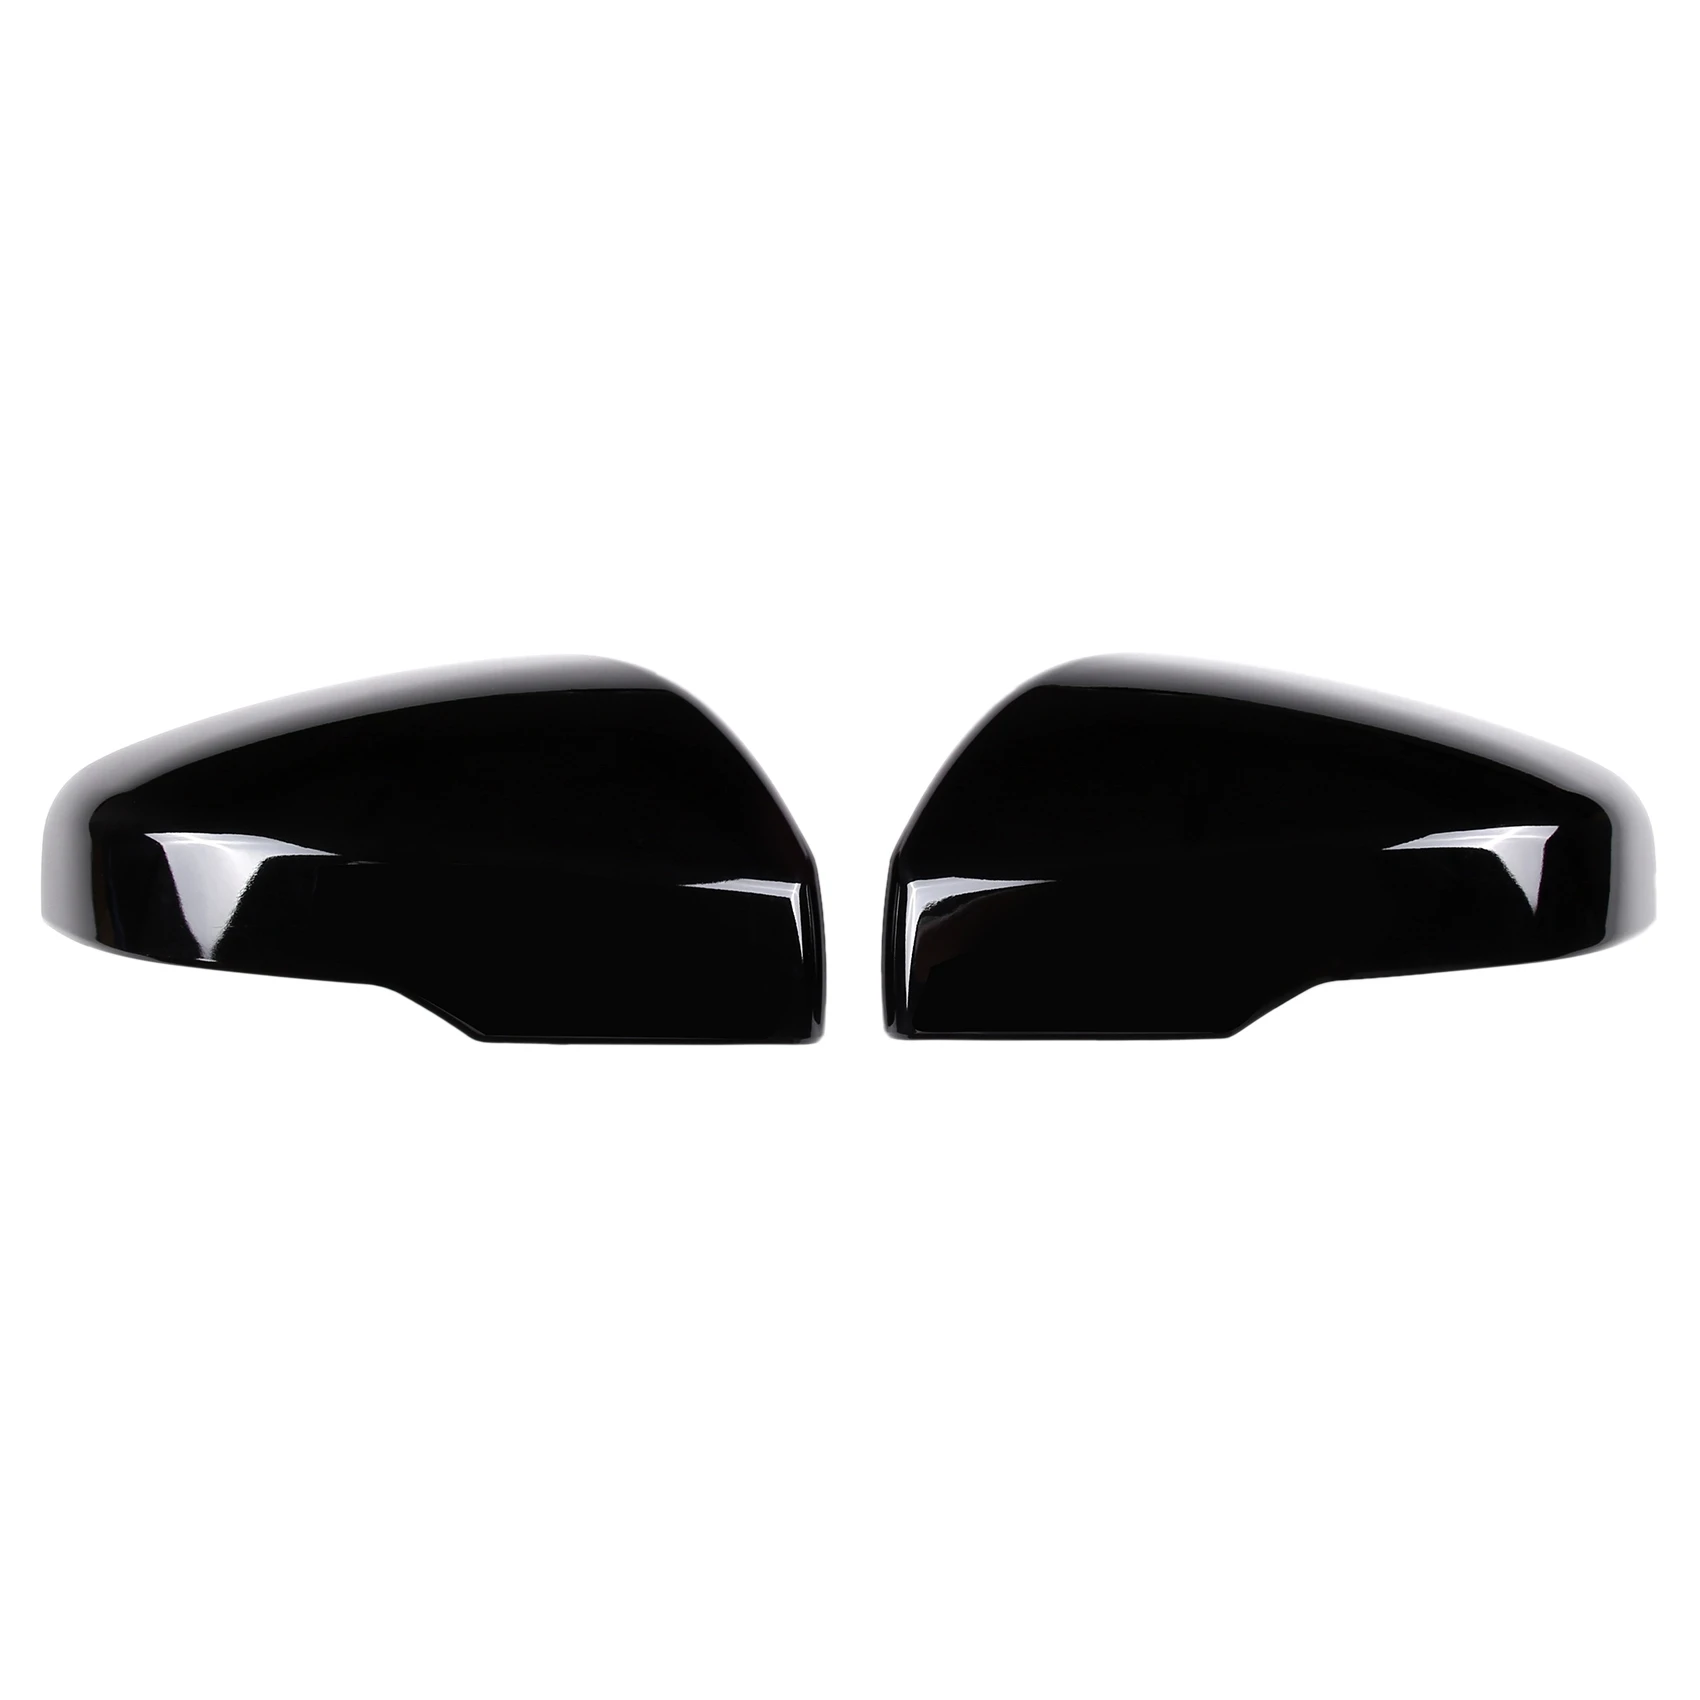 For Subaru Forester/Outback/Legacy/XV 2019-2022 Black ABS Car Rear View Cap Cover Trim Car